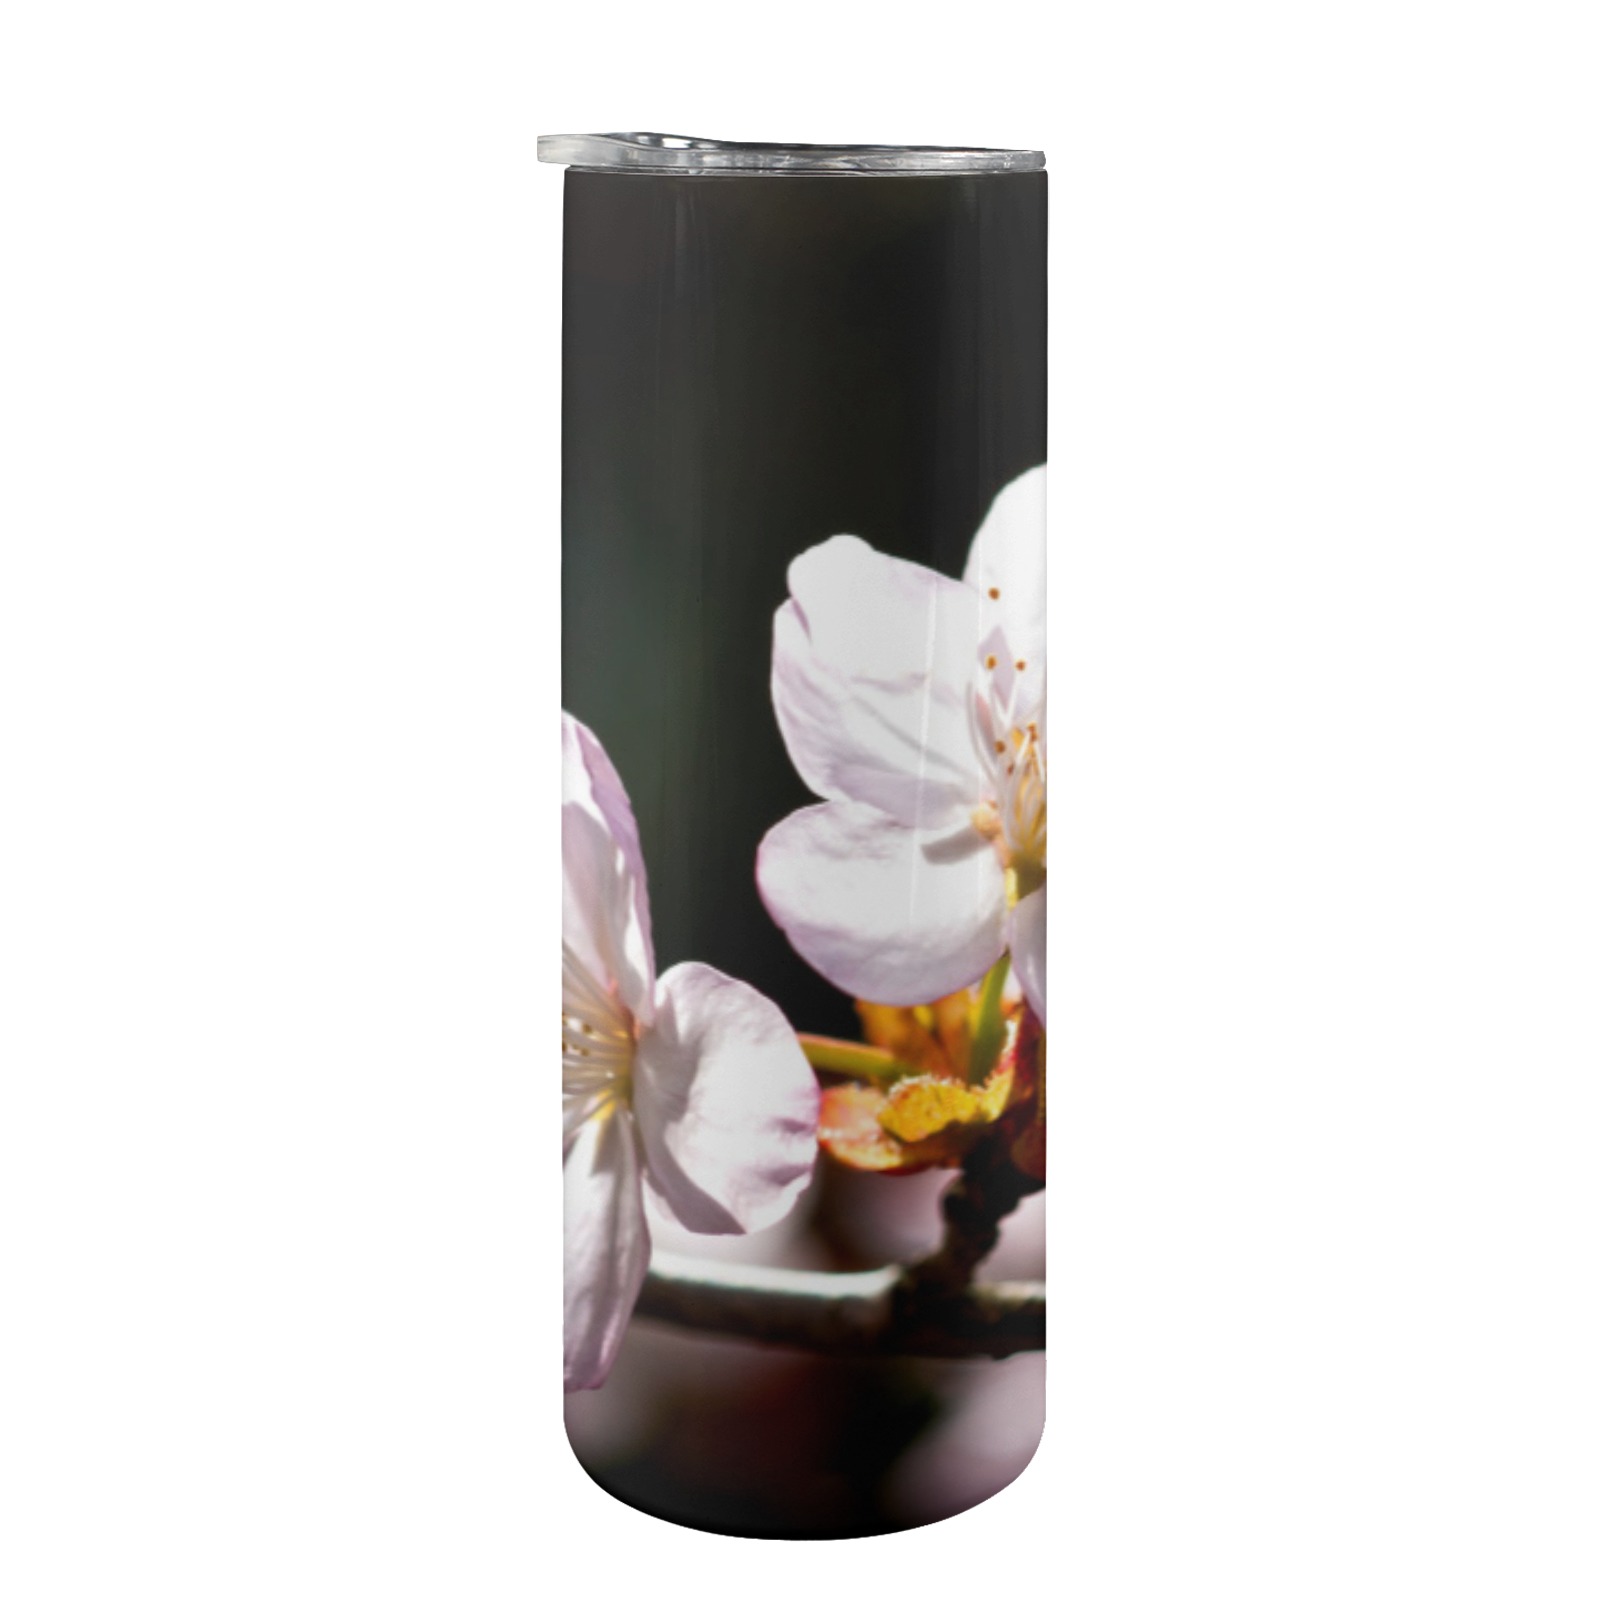 Sunlit sakura flowers. Play of light and shadows. 20oz Tall Skinny Tumbler with Lid and Straw